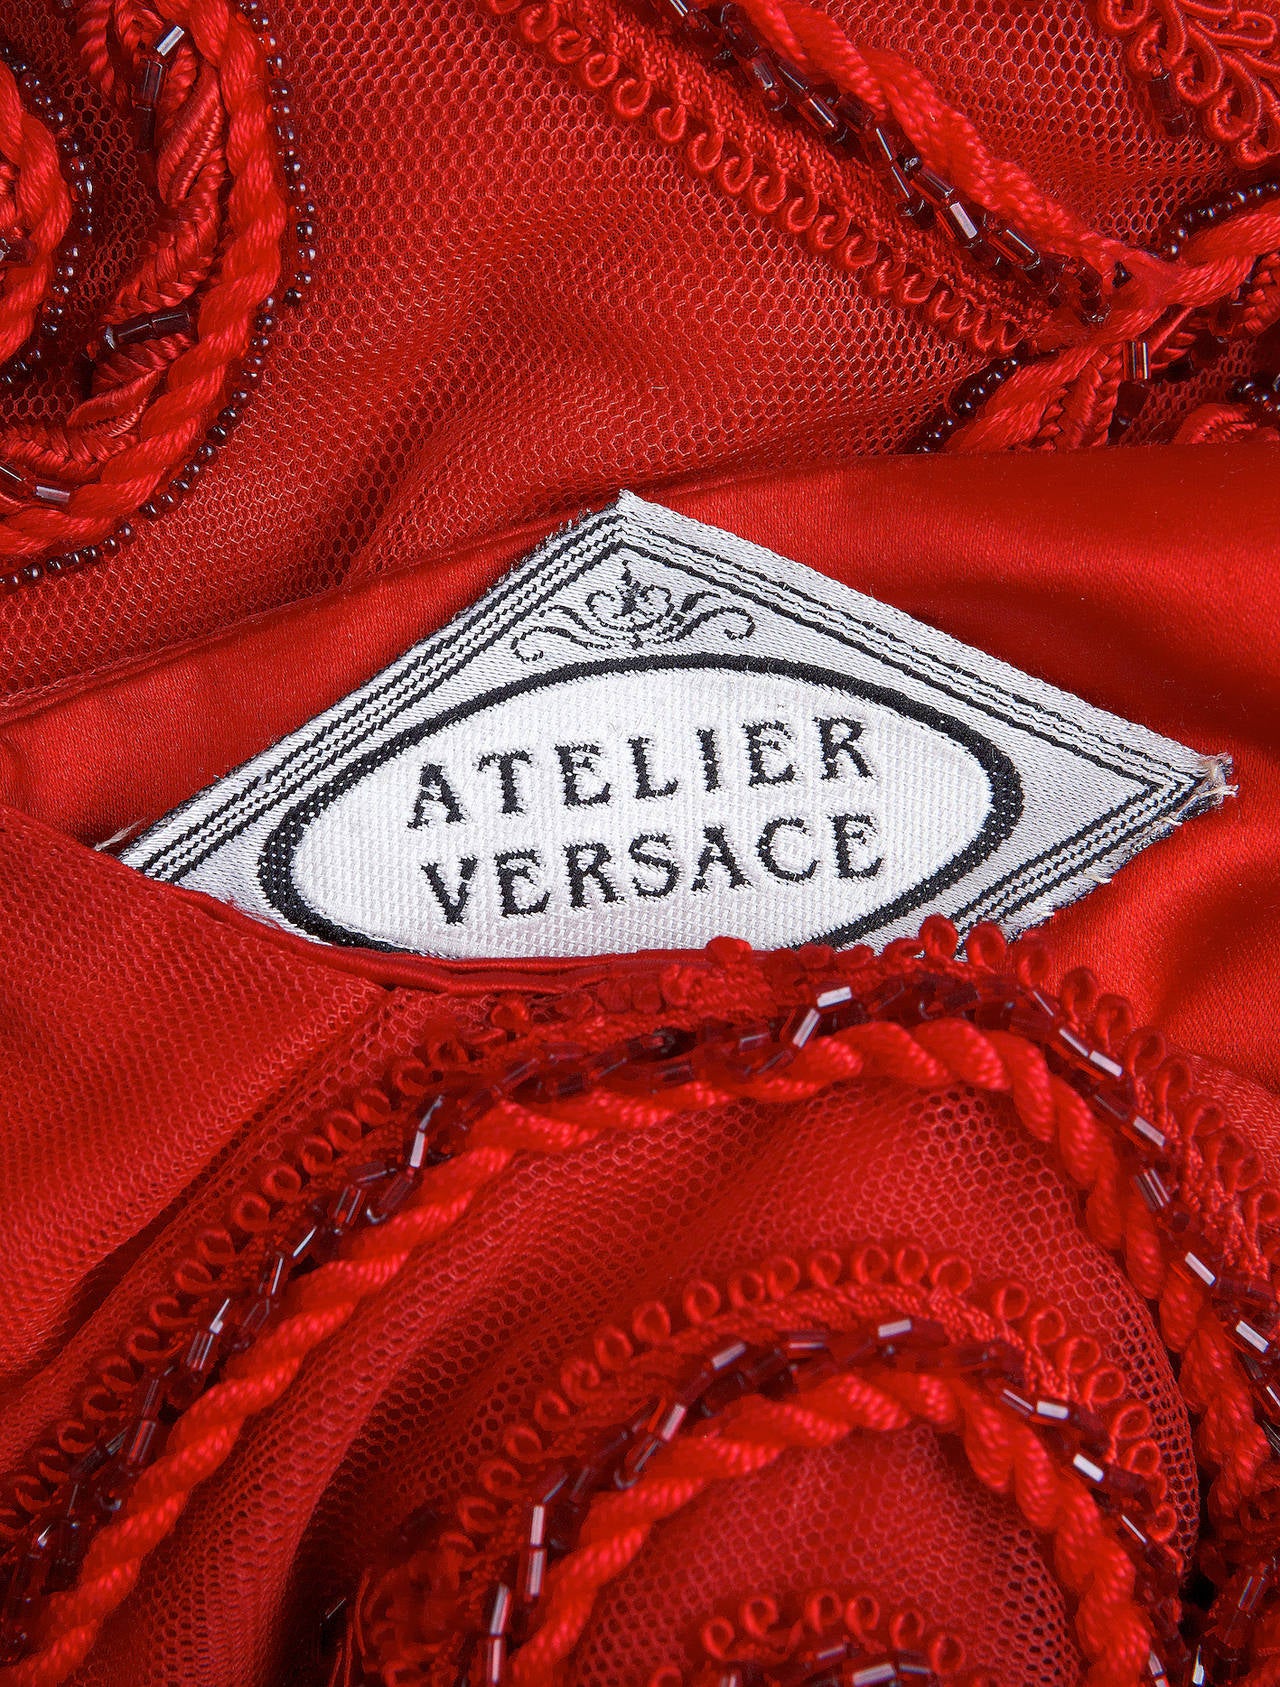 A very rare Atelier Versace Lesage embroidered silk skirt from the Spring 1991 collection.

Marked an Italian 40.